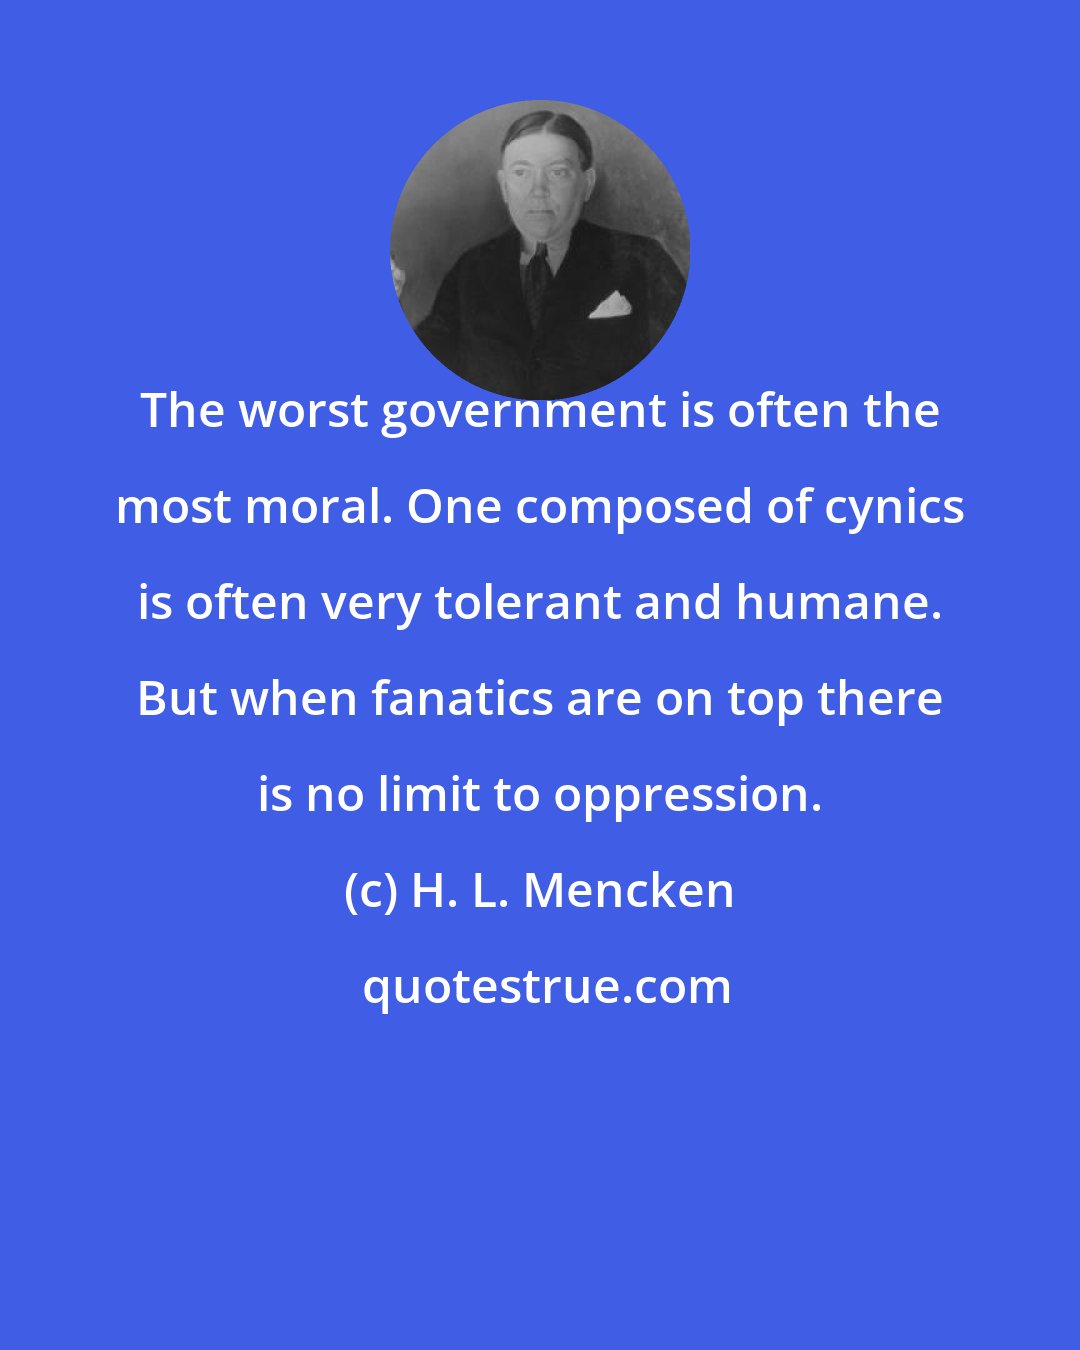 H. L. Mencken: The worst government is often the most moral. One composed of cynics is often very tolerant and humane. But when fanatics are on top there is no limit to oppression.